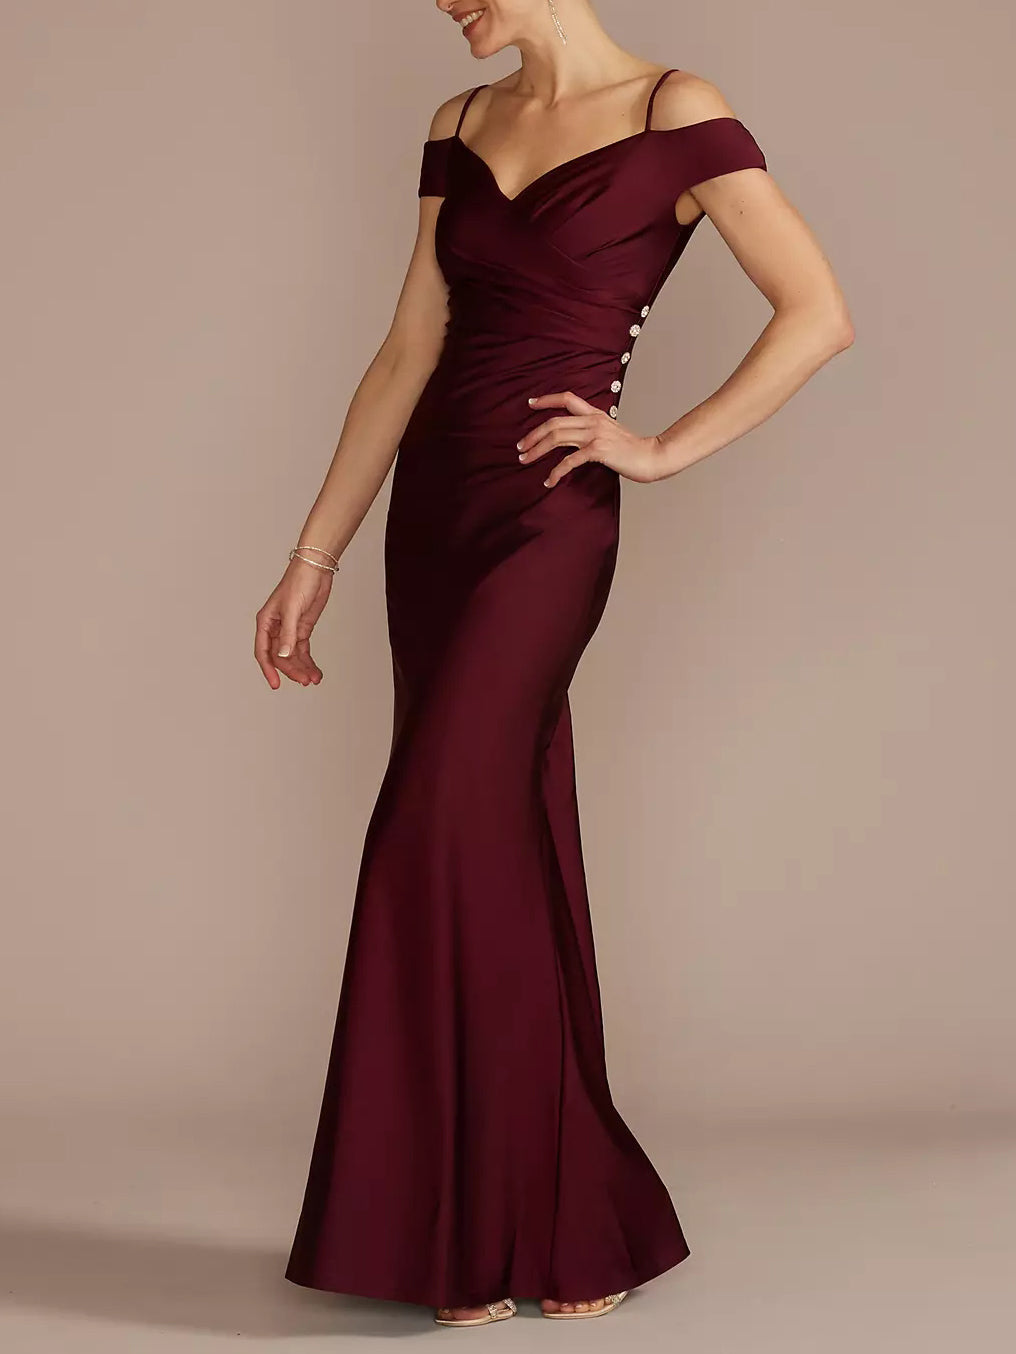 Polyester Spandex Mermaid Off the Shoulder Cap Sleeves Dress-GD102051